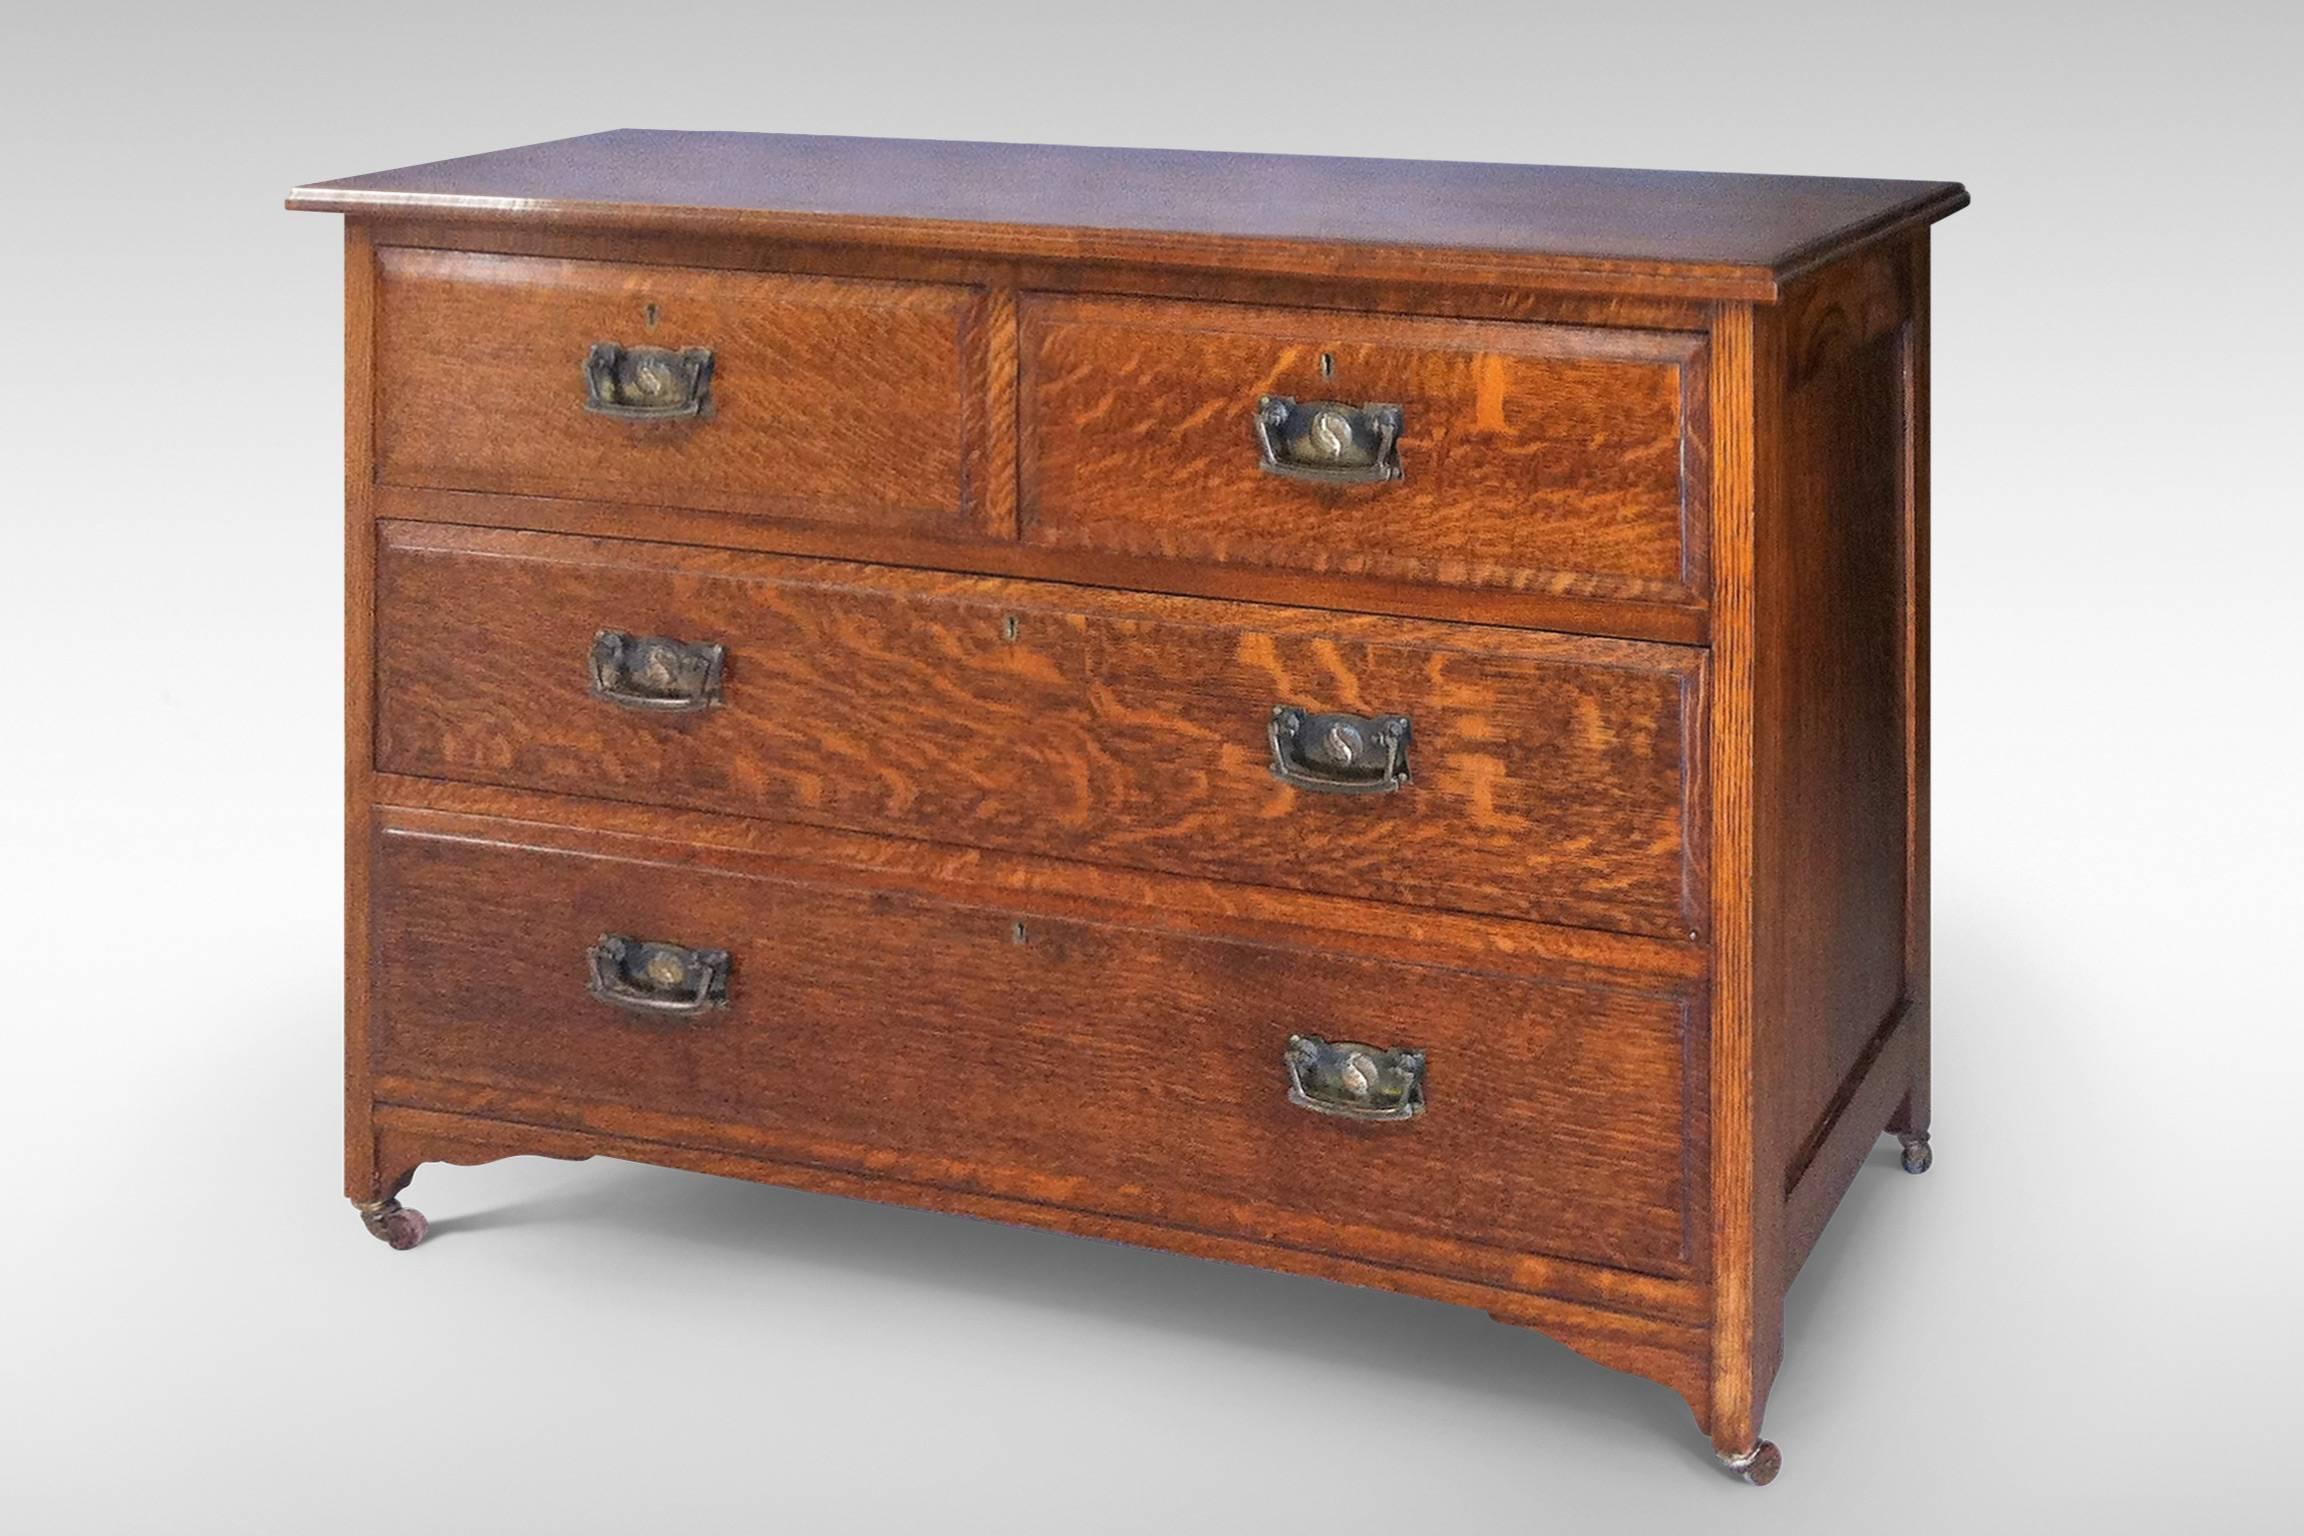 British Arts and Crafts Movement Chest of Drawers in Quarter-Sawn Oak